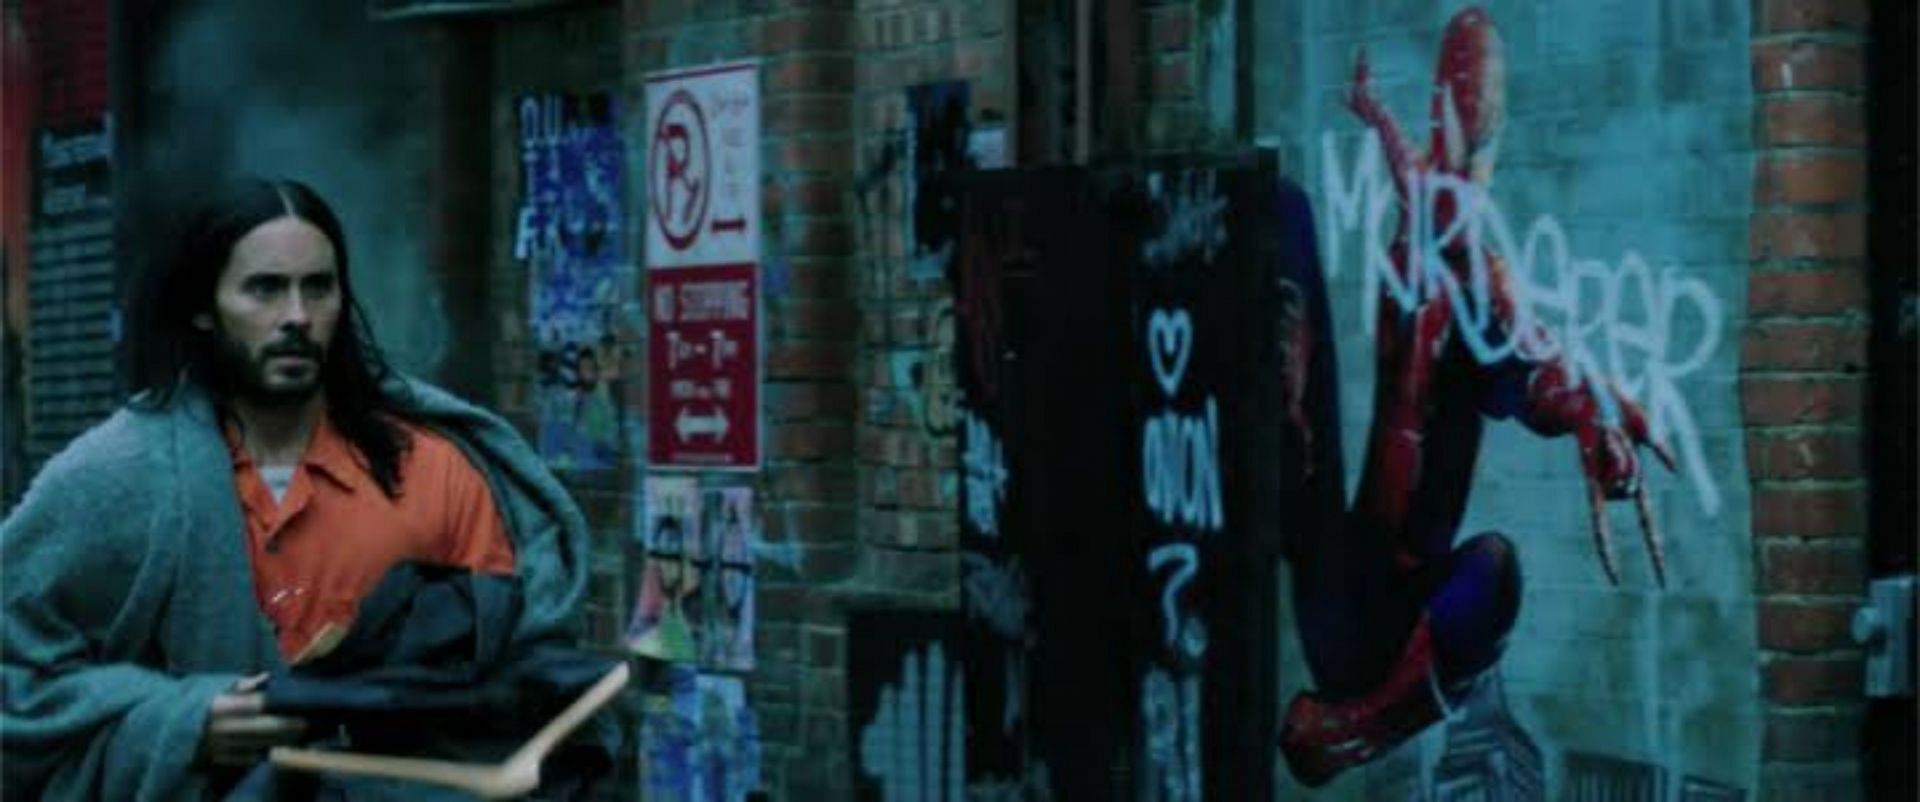 Deleted scene from Morbius featuring the Spider-Man mural (Image via Sony Pictures Entertainment)